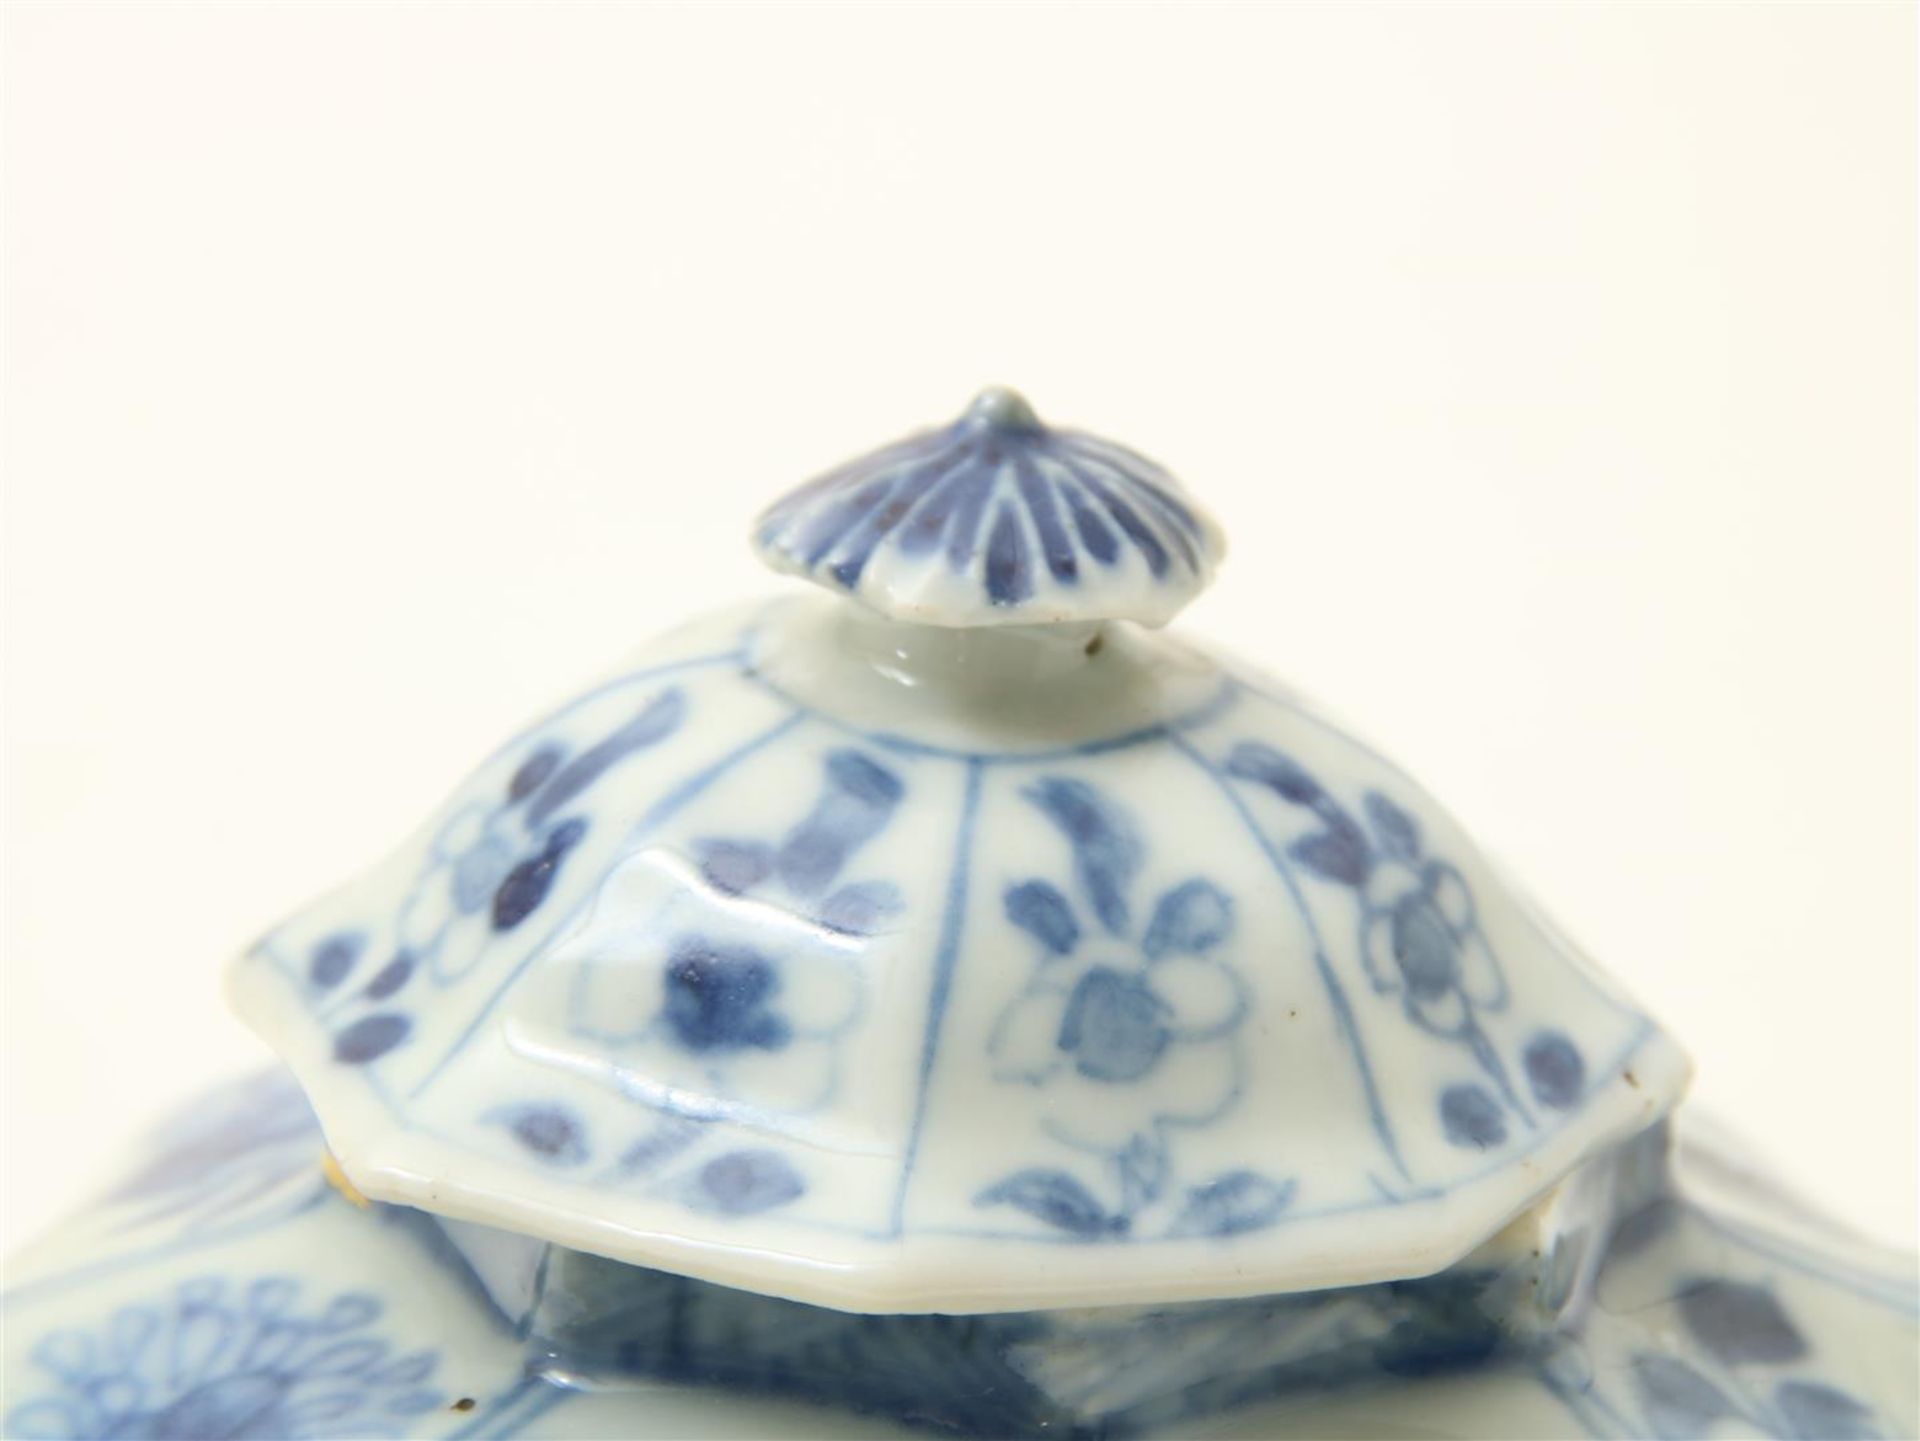 Porcelain lobed Kangxi teapot with long frame and floral decoration, China 18th century, height 10 - Image 3 of 7